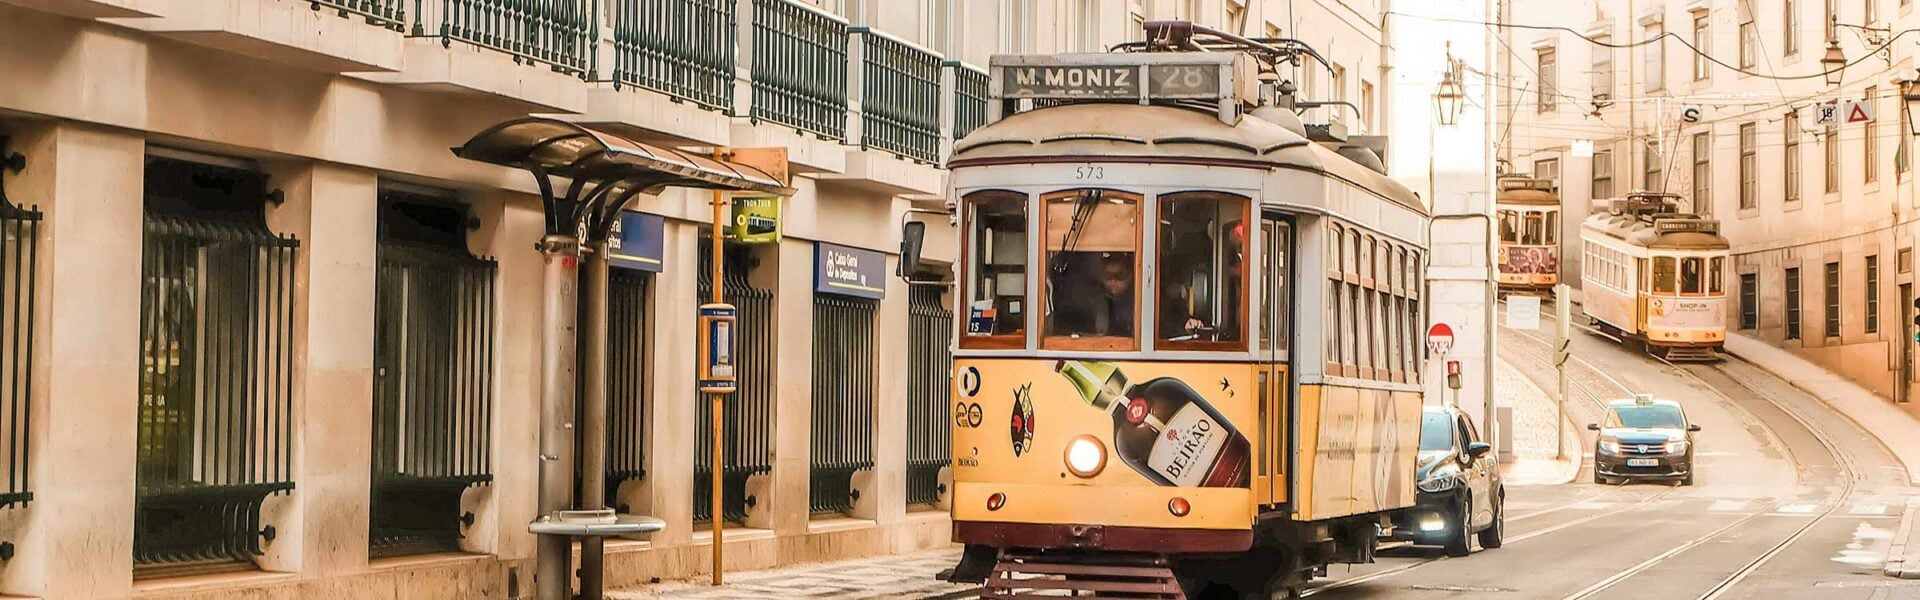 Yellow trams on a street in Lisbon, Portugal with tall beige buildings on either side.